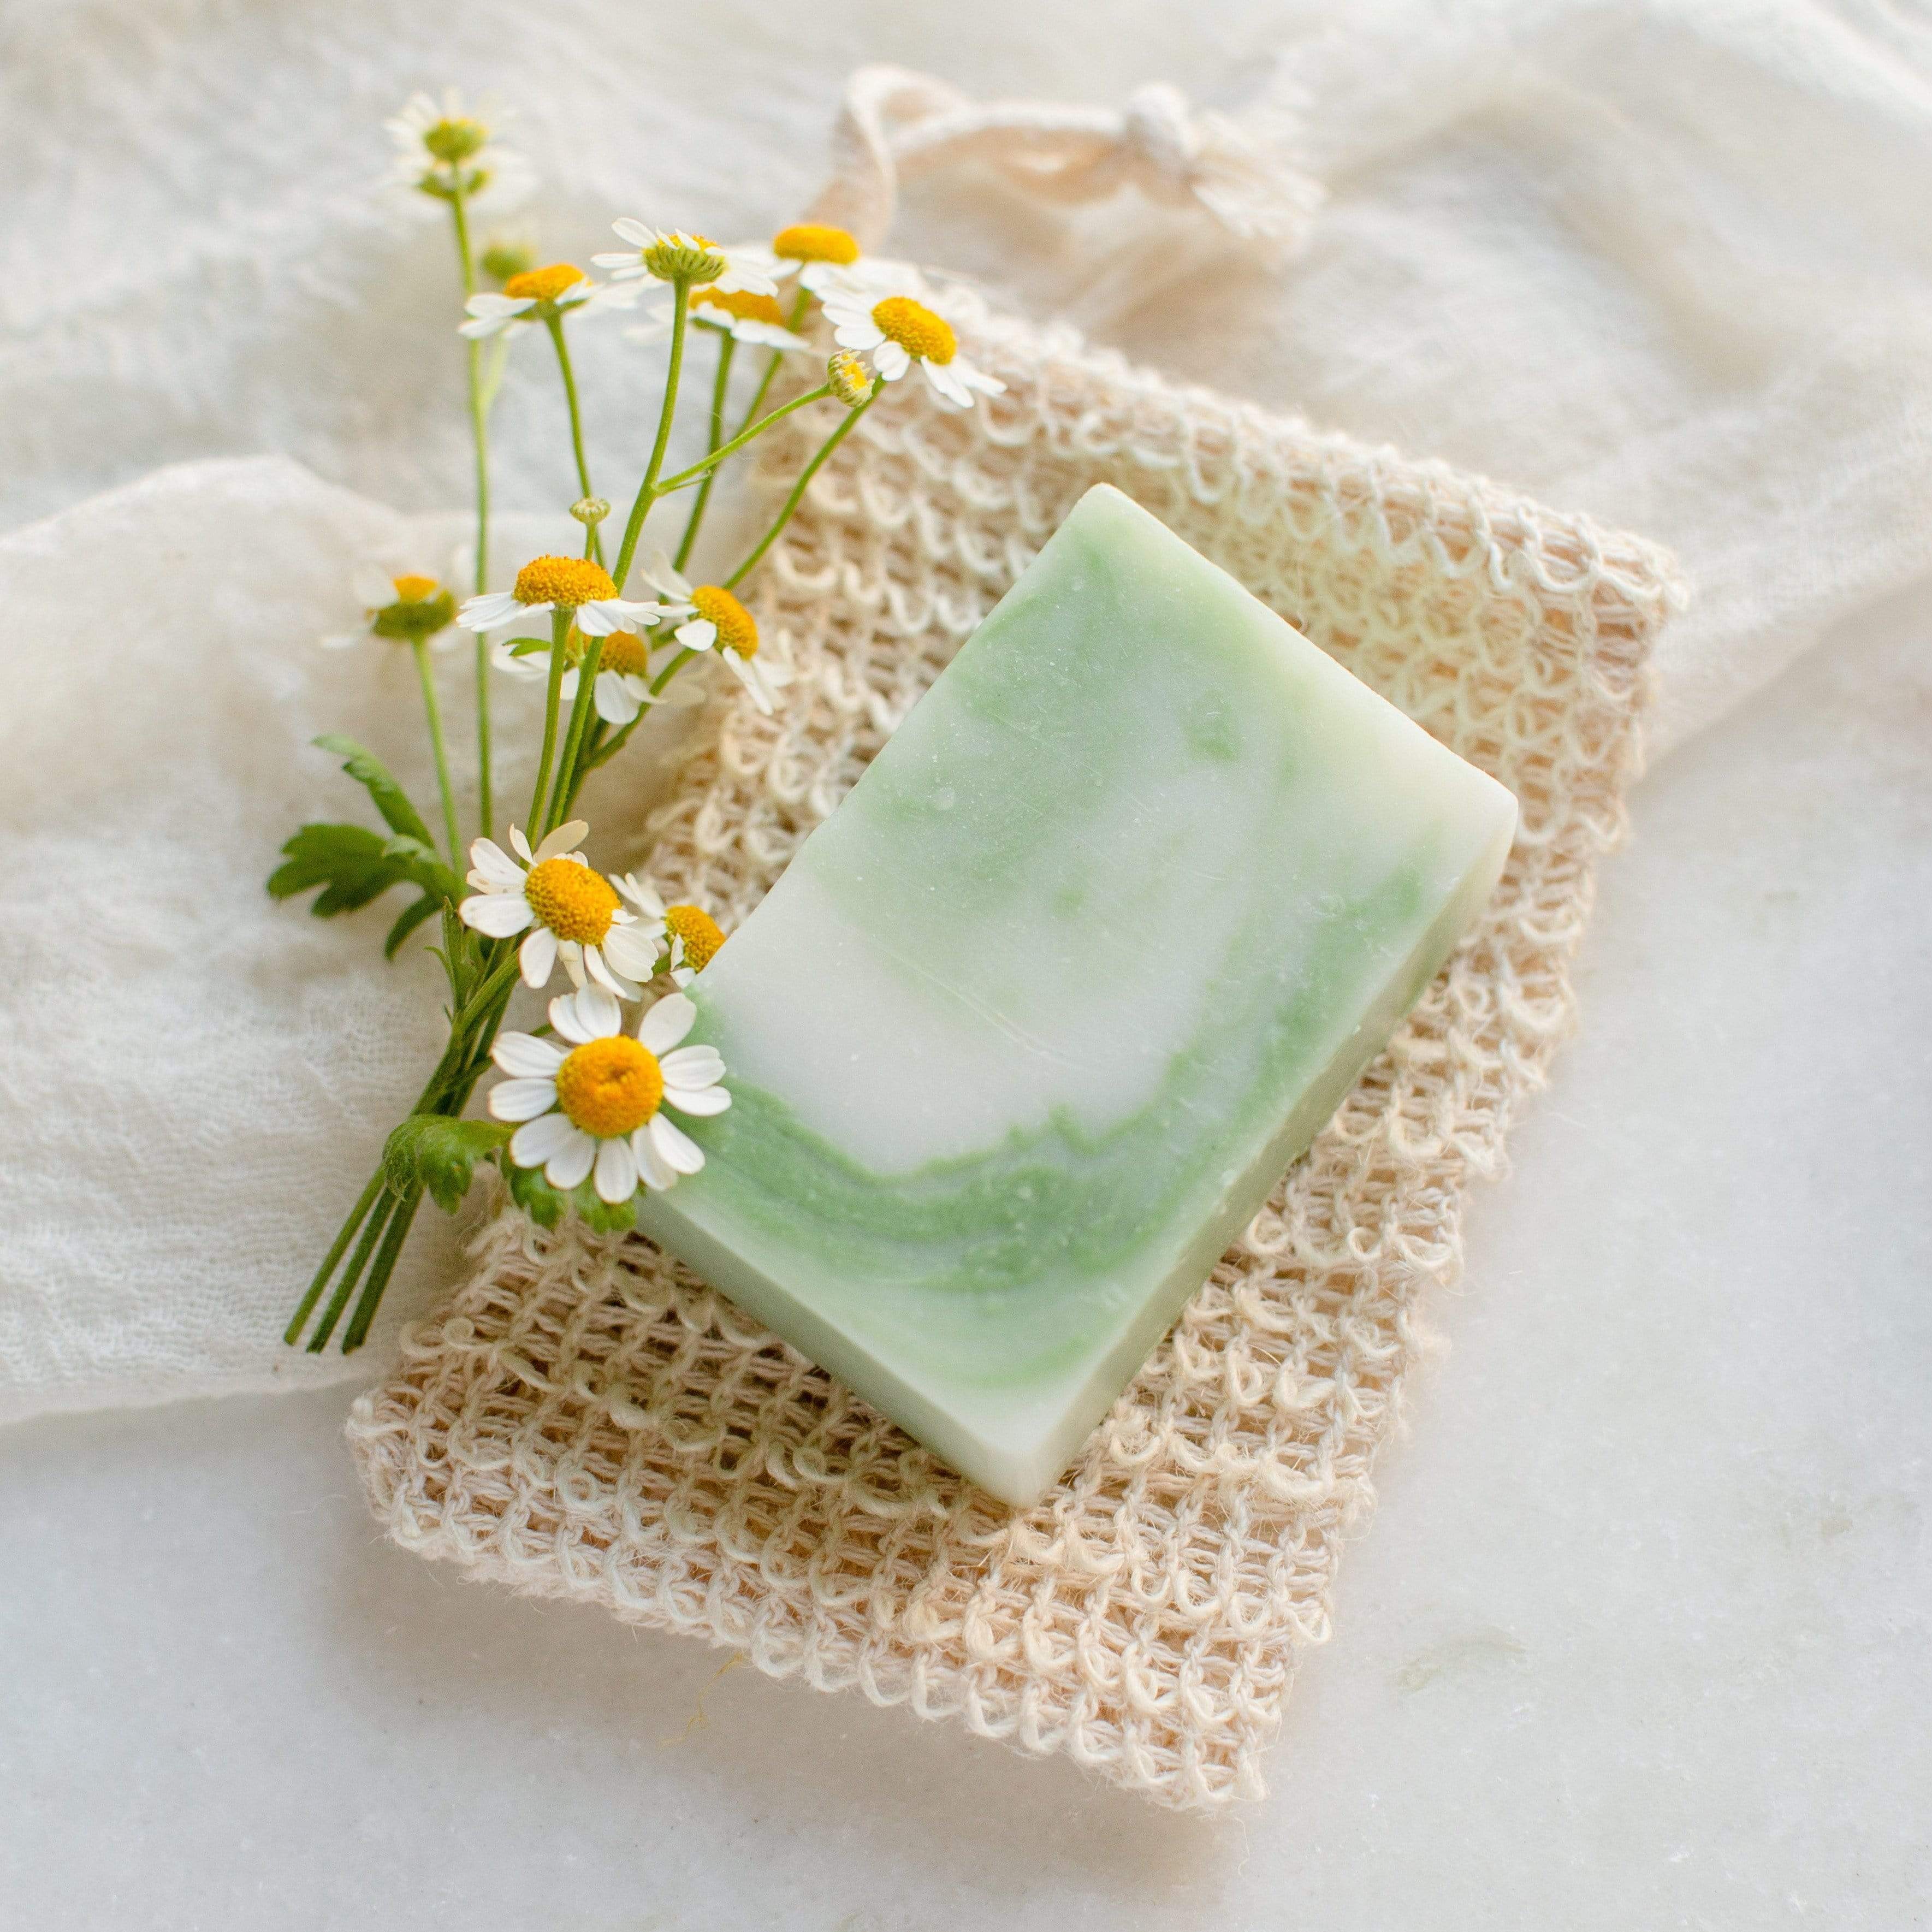 Unscented Soap Bar for Sensitive Skin - No Tox Life